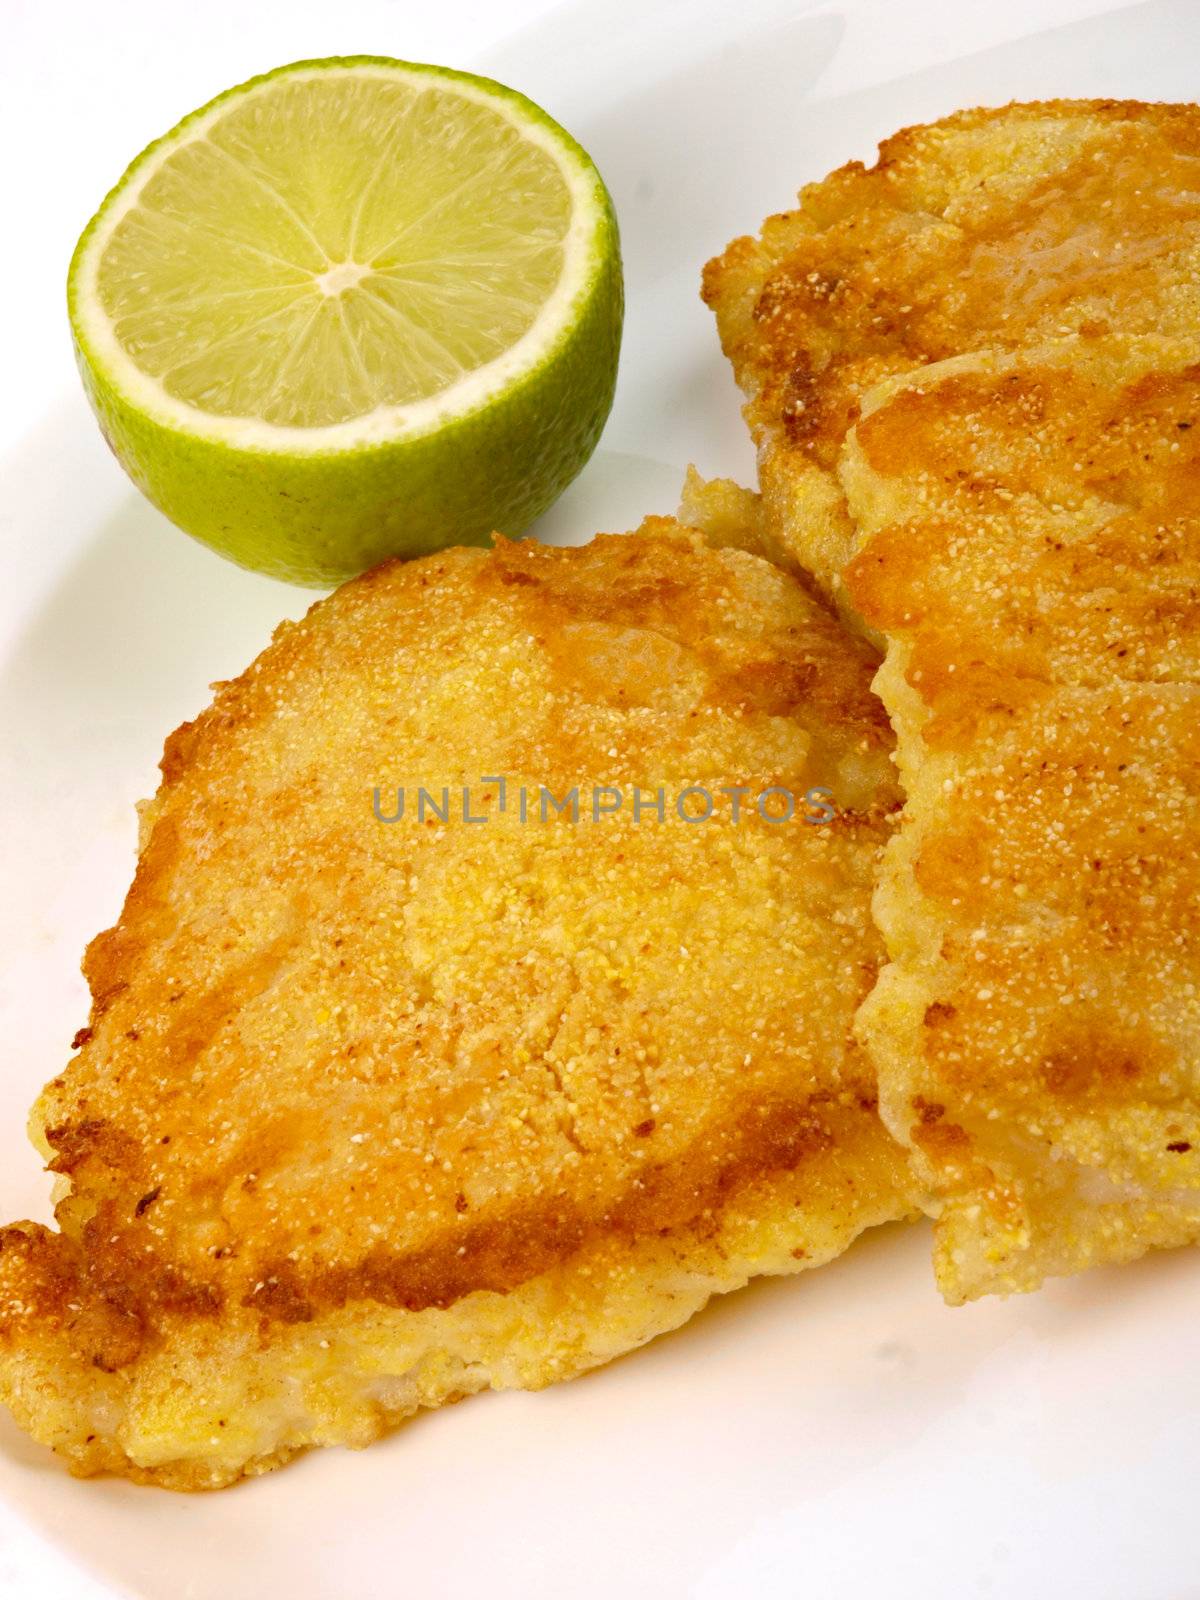 Fish Filet with lemon. Close up on white background by dotweb